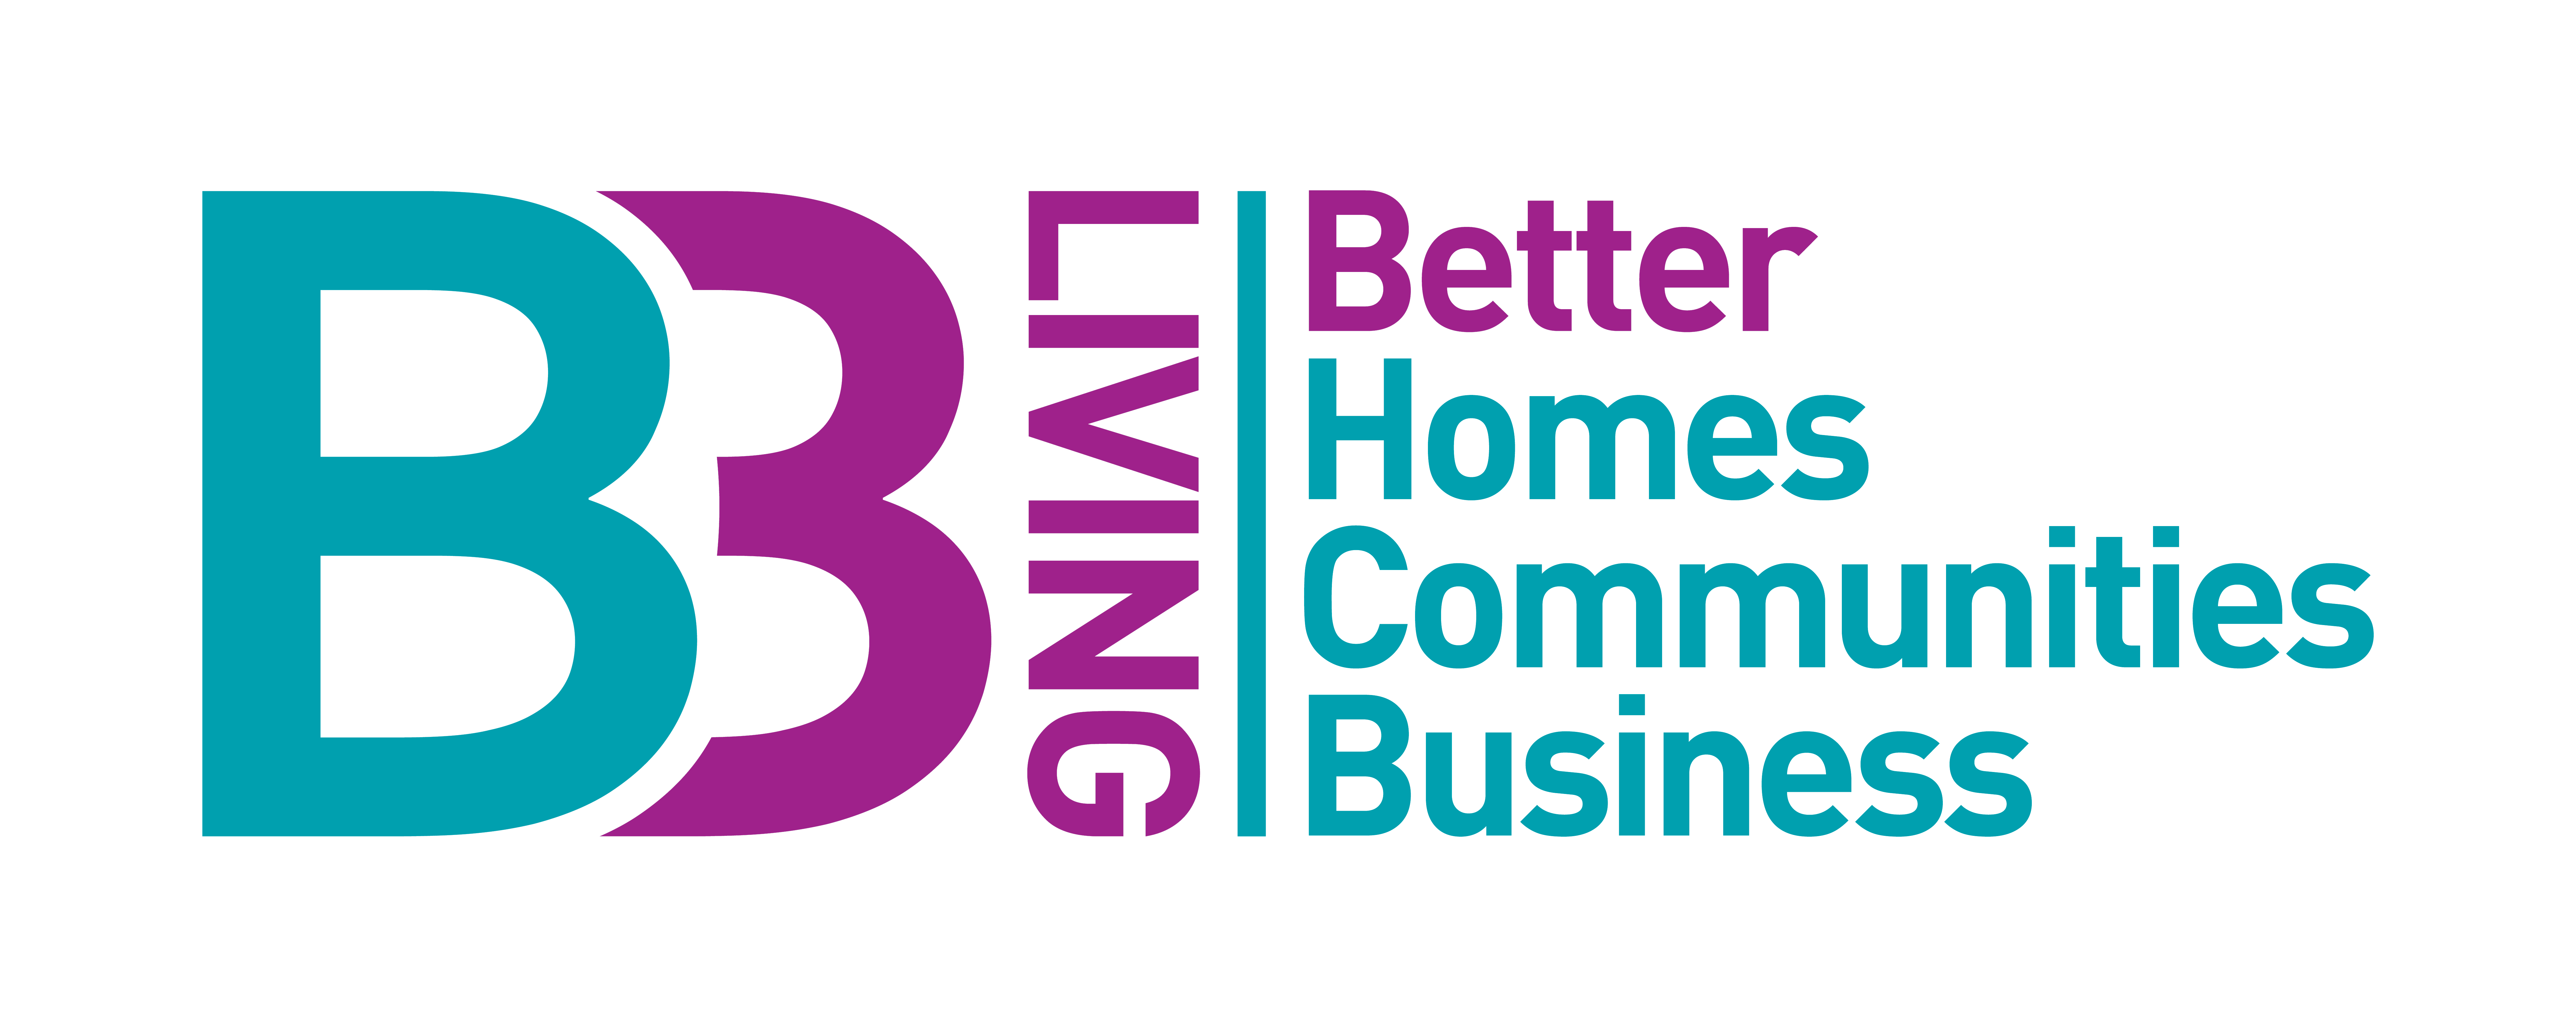 B3Living logo with strapline that reads "Better homes, communities, business"